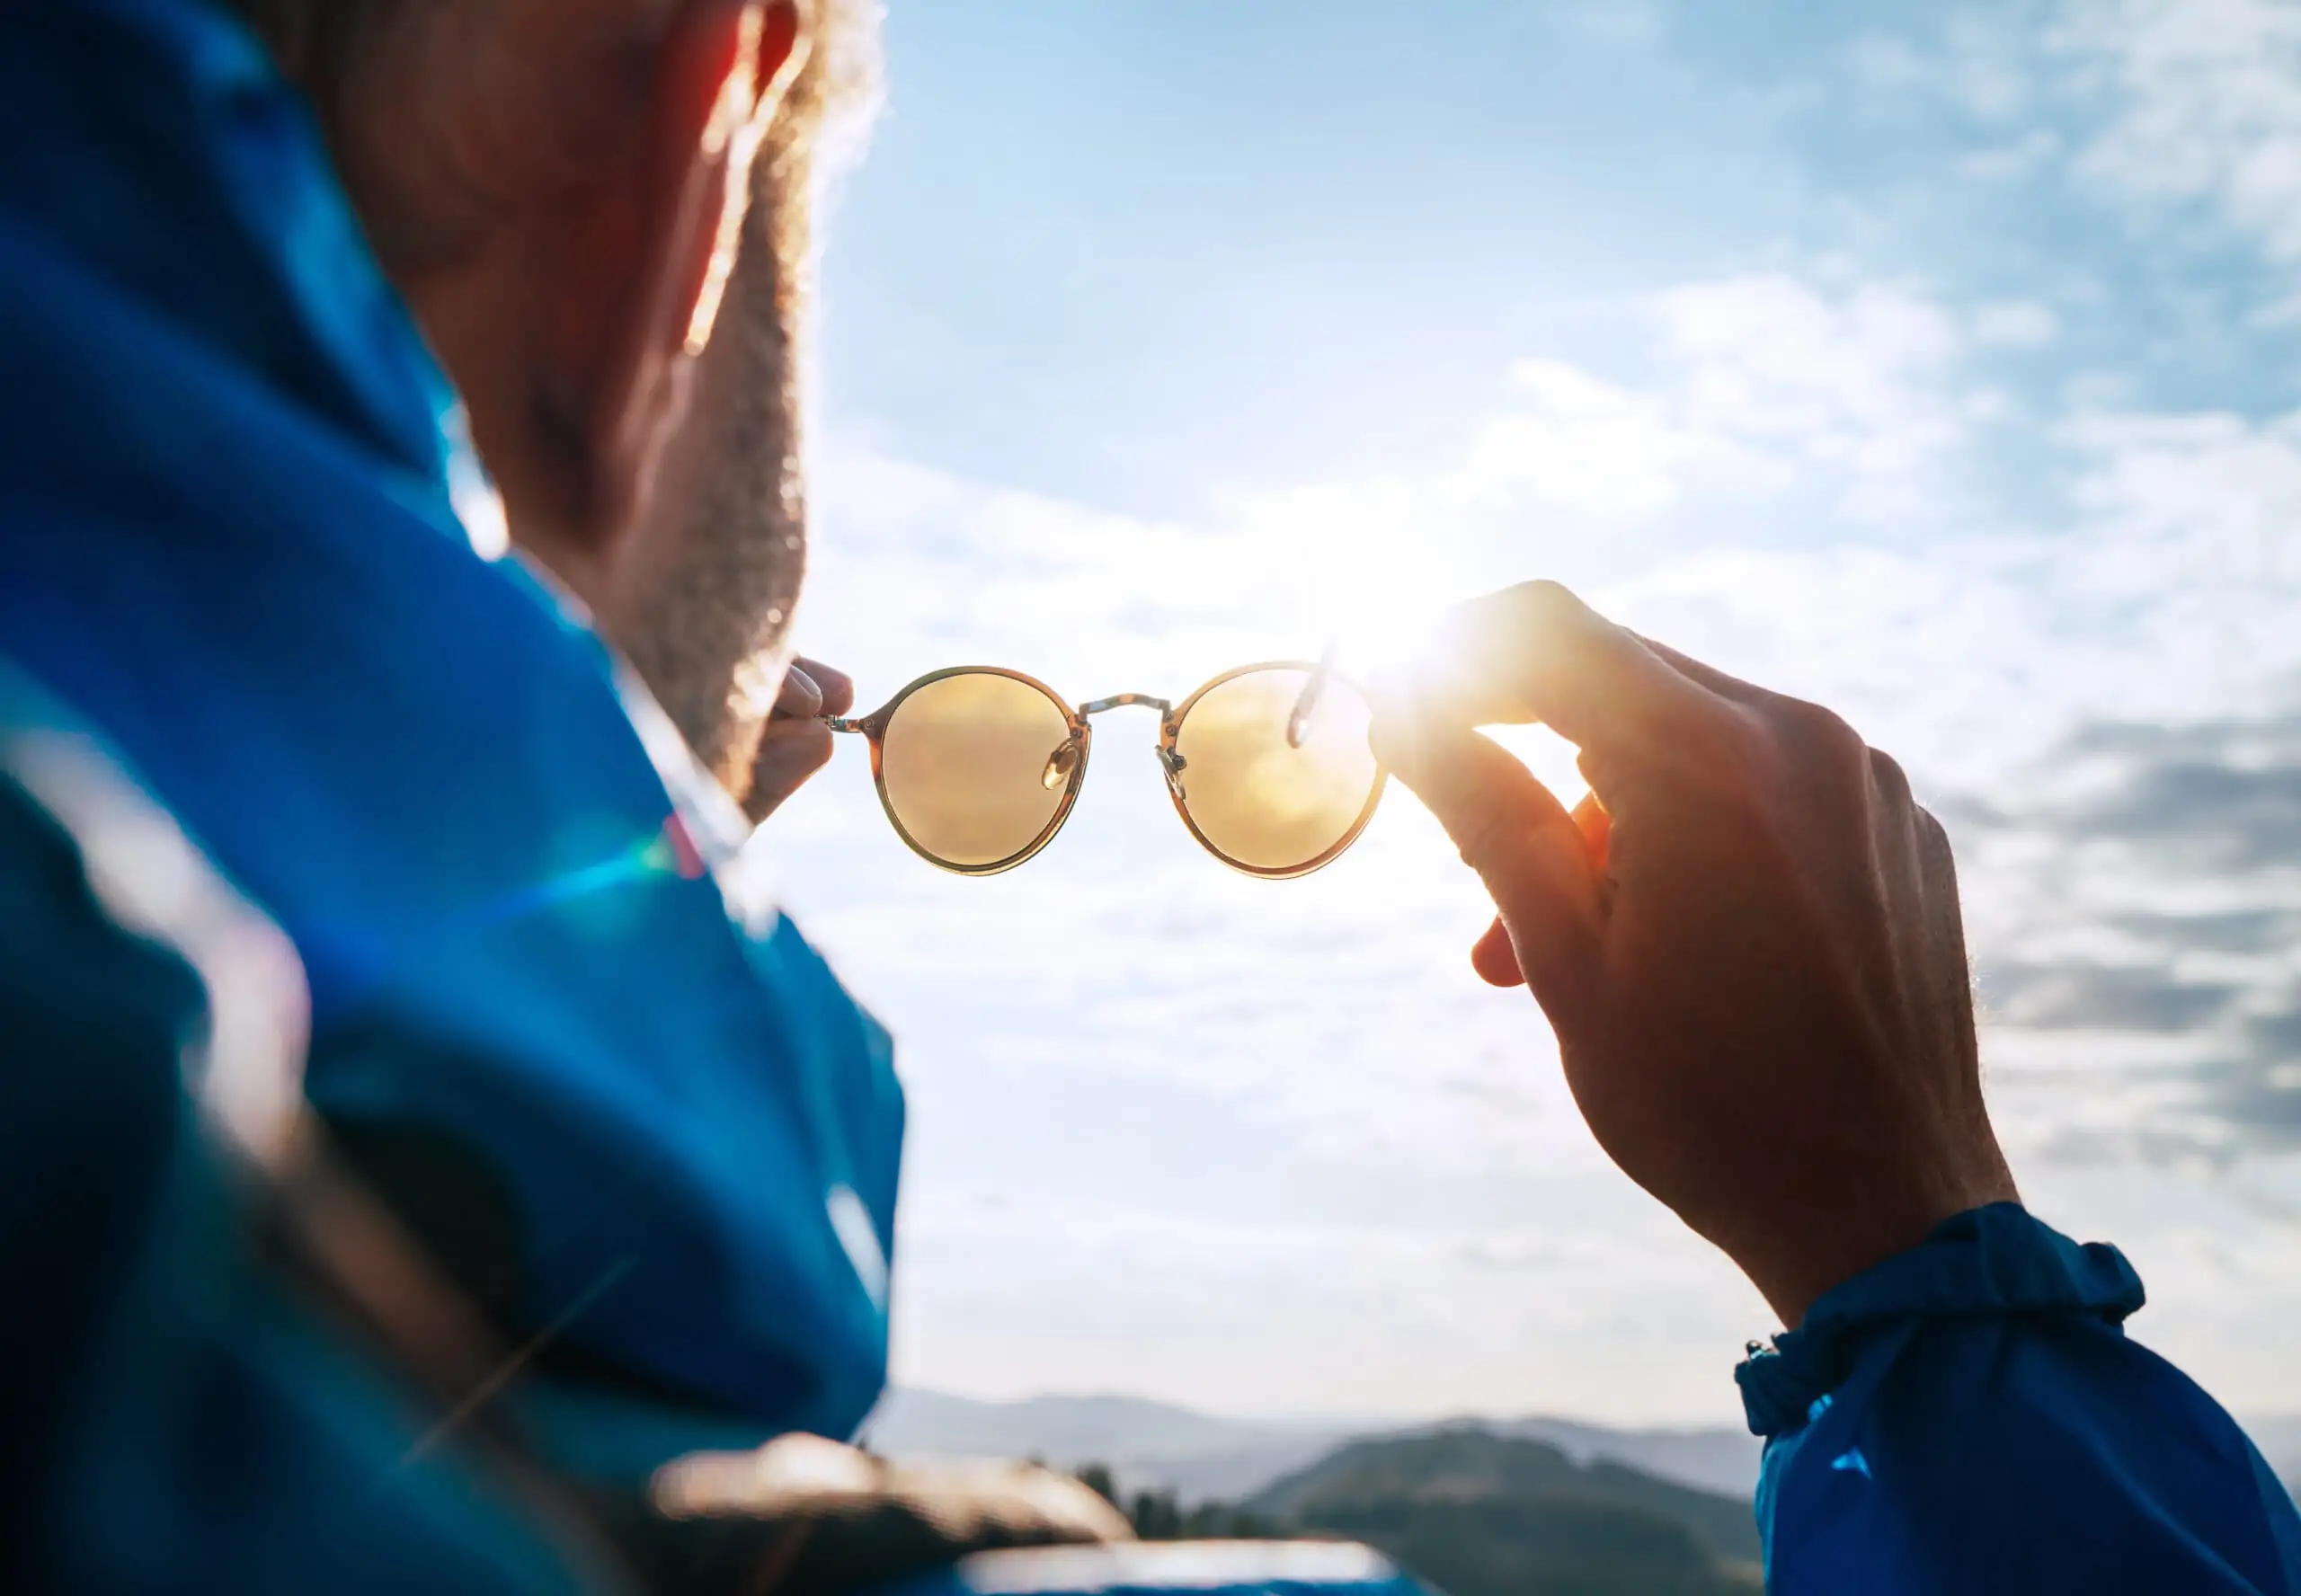 Prescription sunglasses can get expensive, which is why some look into LASIK